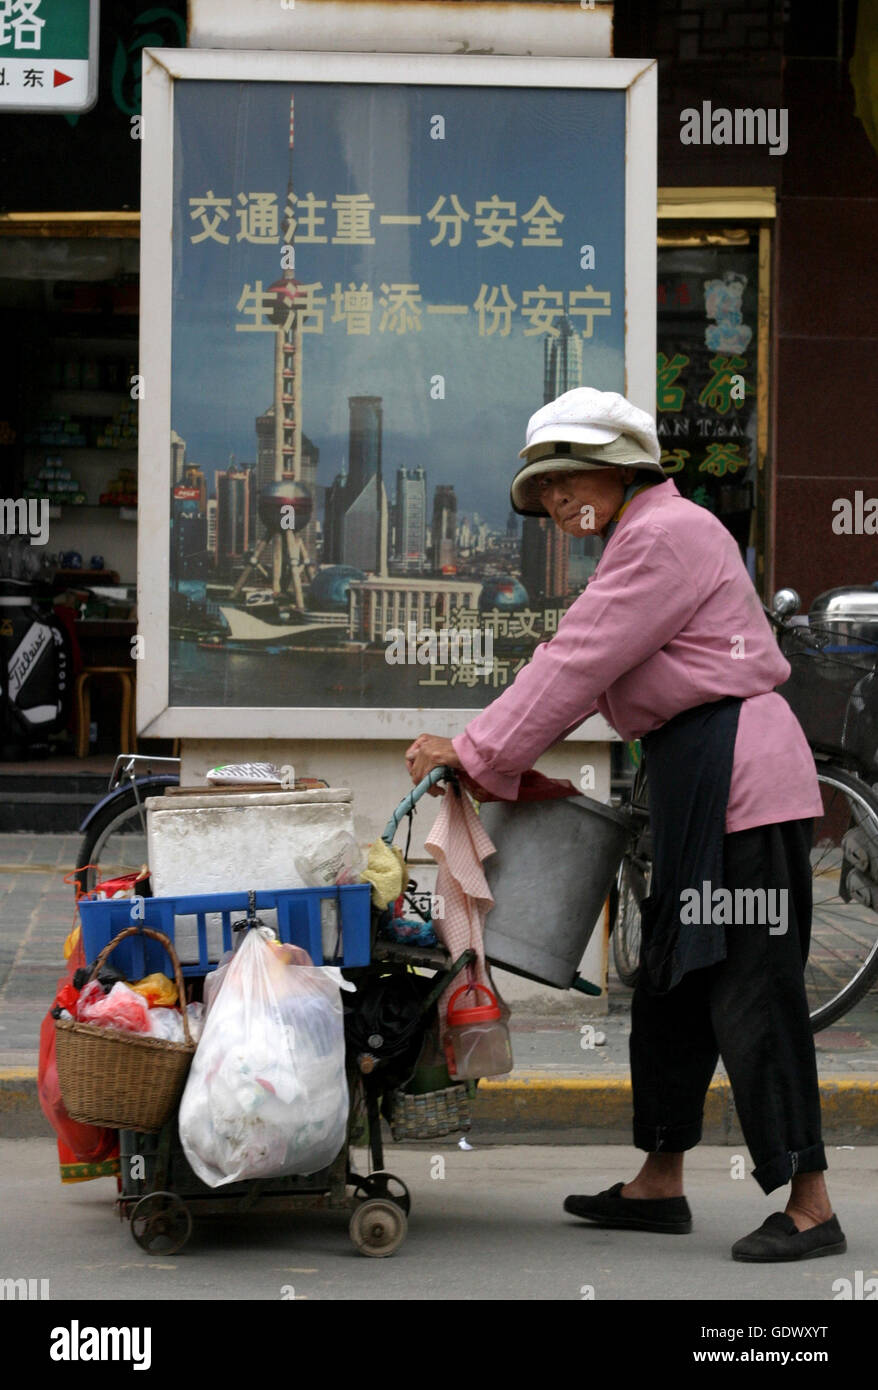 A Chinese woman pushes a cart with things she collected walks on a street Stock Photo